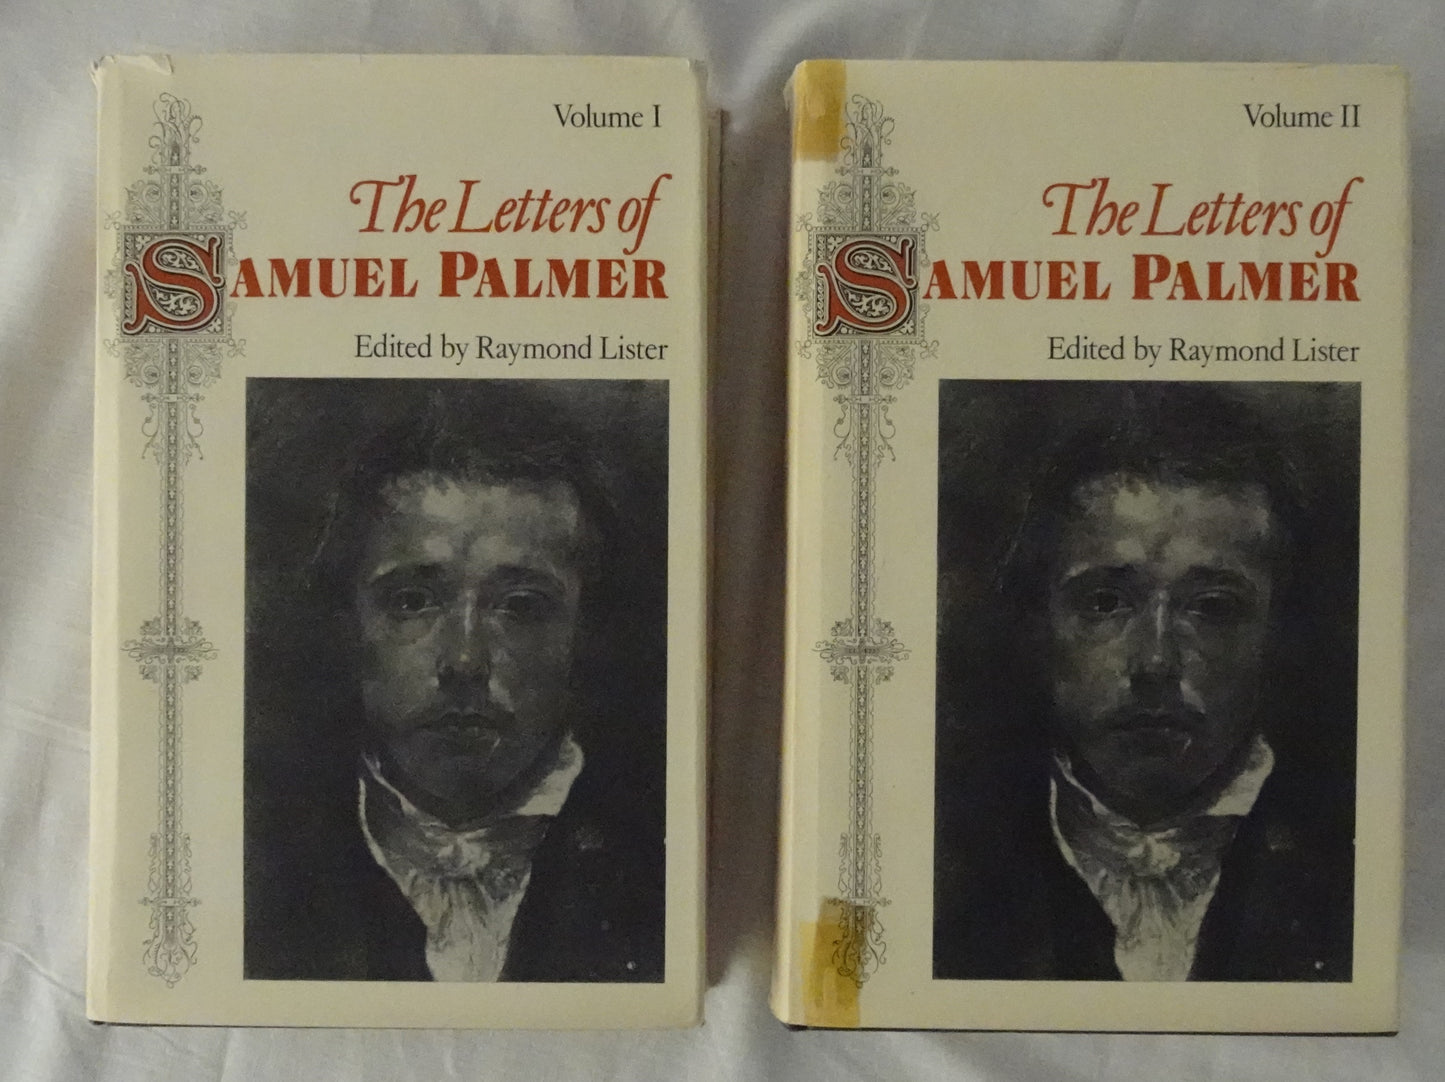 The Letters of Samuel Palmer  Volume I and Volume II  Edited by Raymond Lister